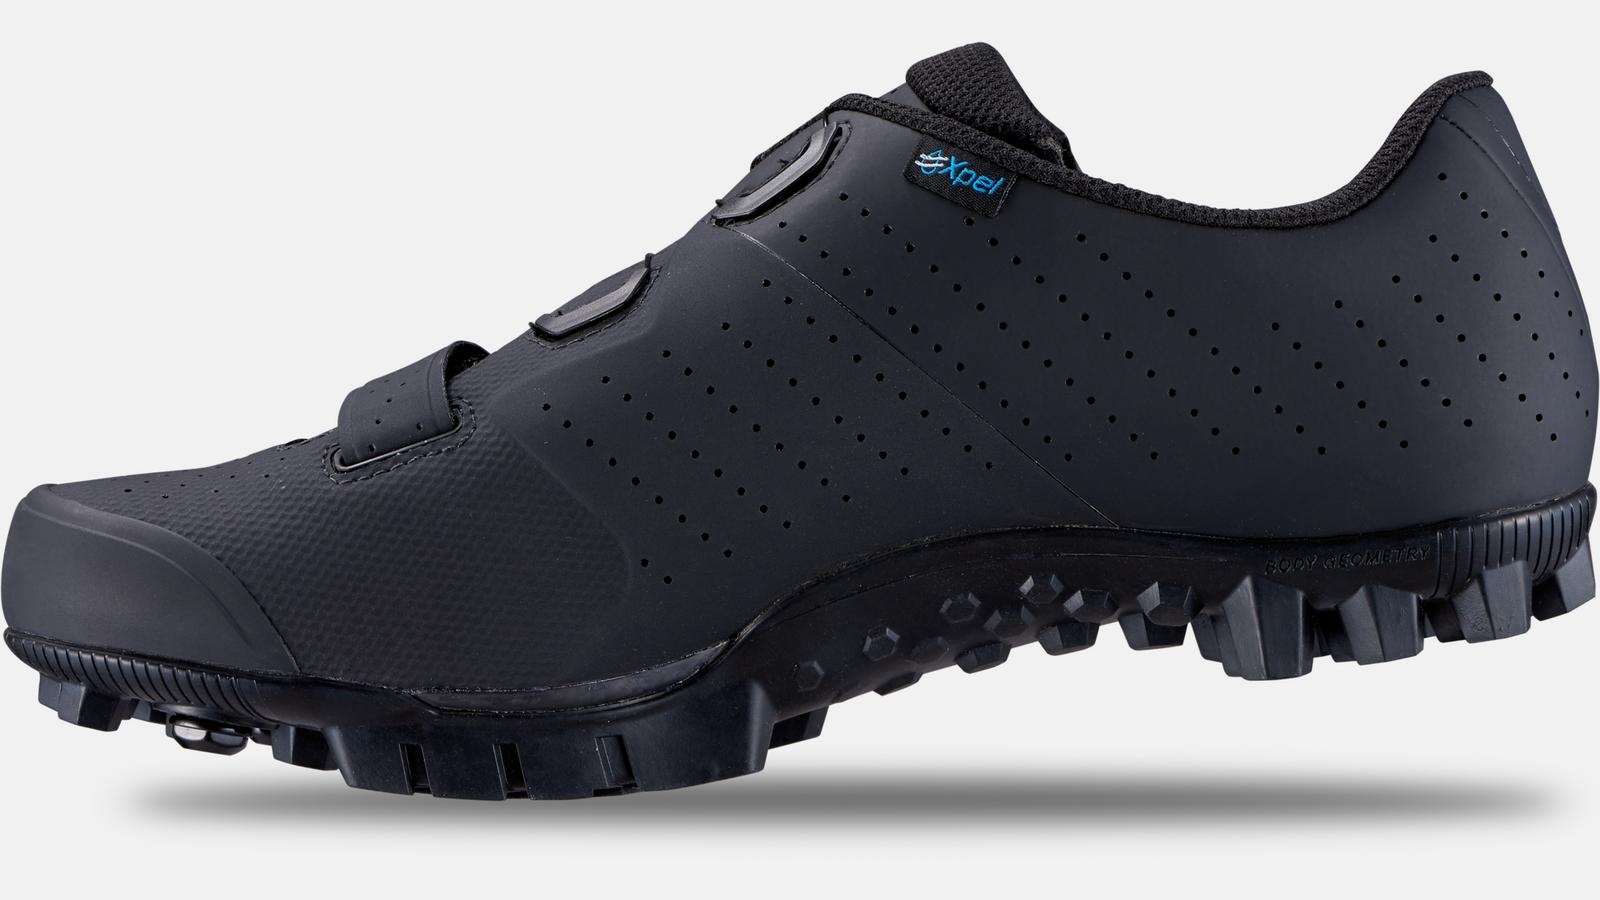 SPECIALIZED Couvre-Chaussures Etanches CHAUSSURES VELO